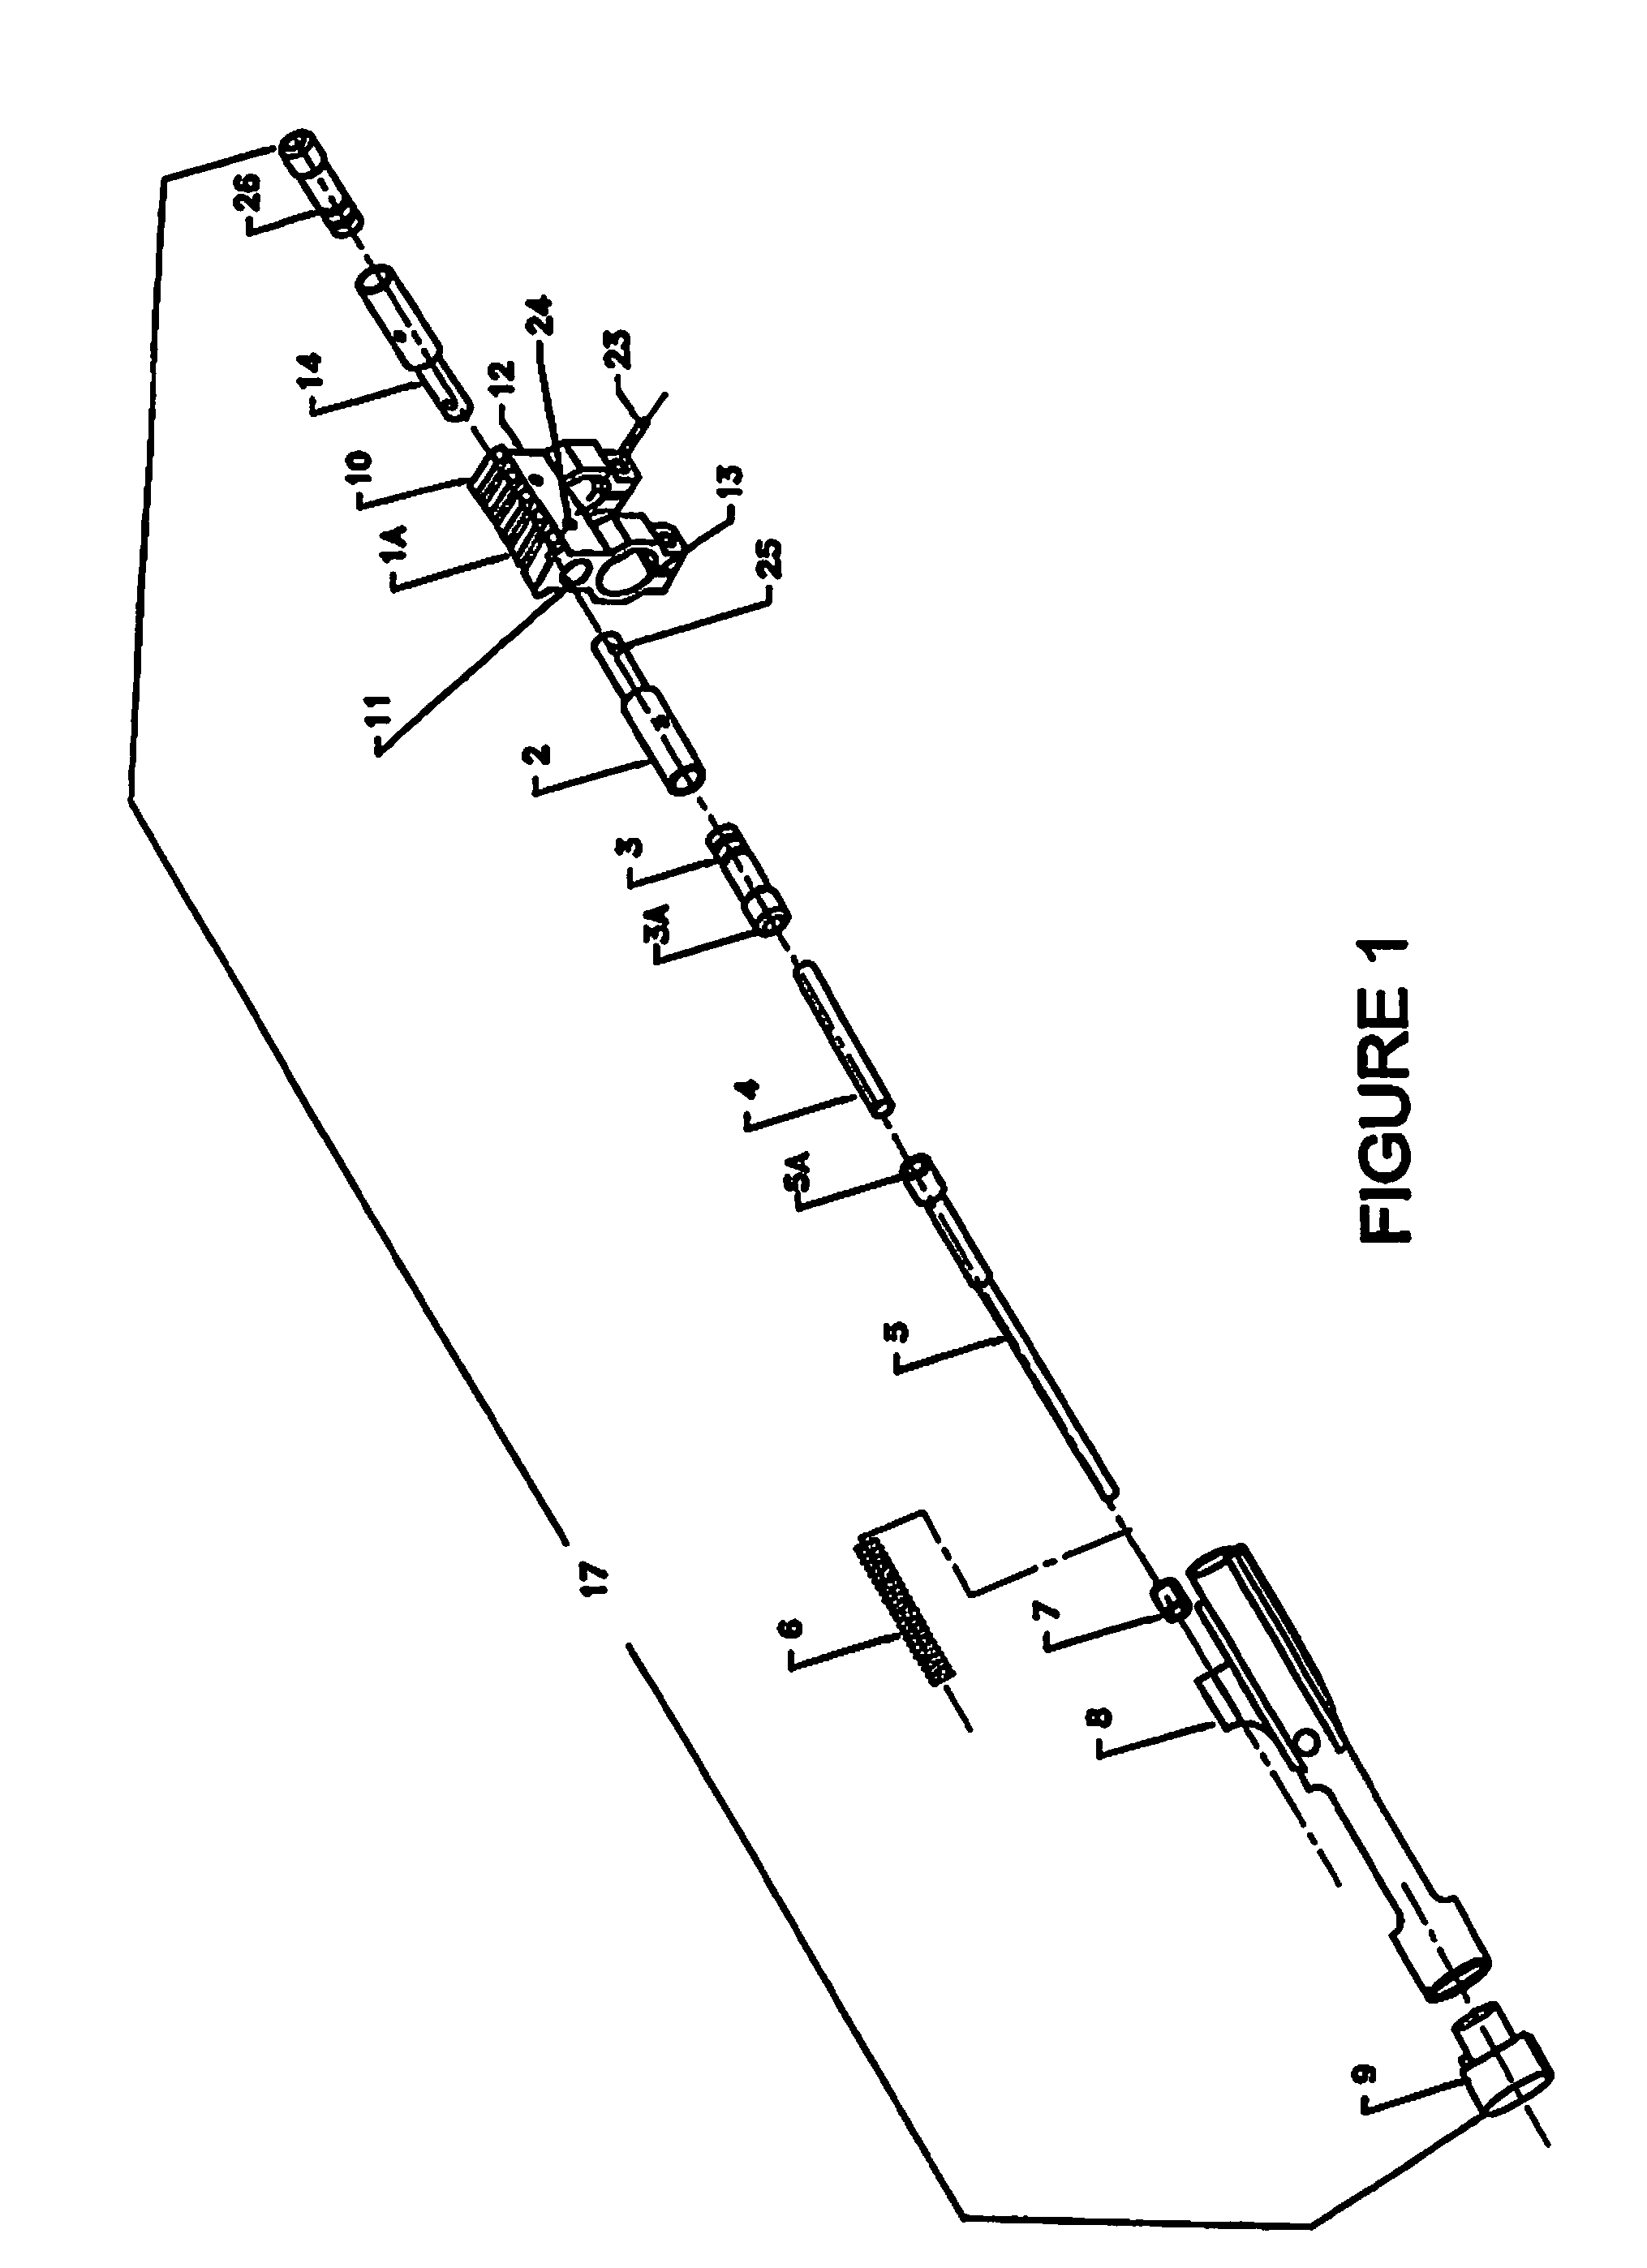 Anti-wear buffer device for bolt carrier assembly